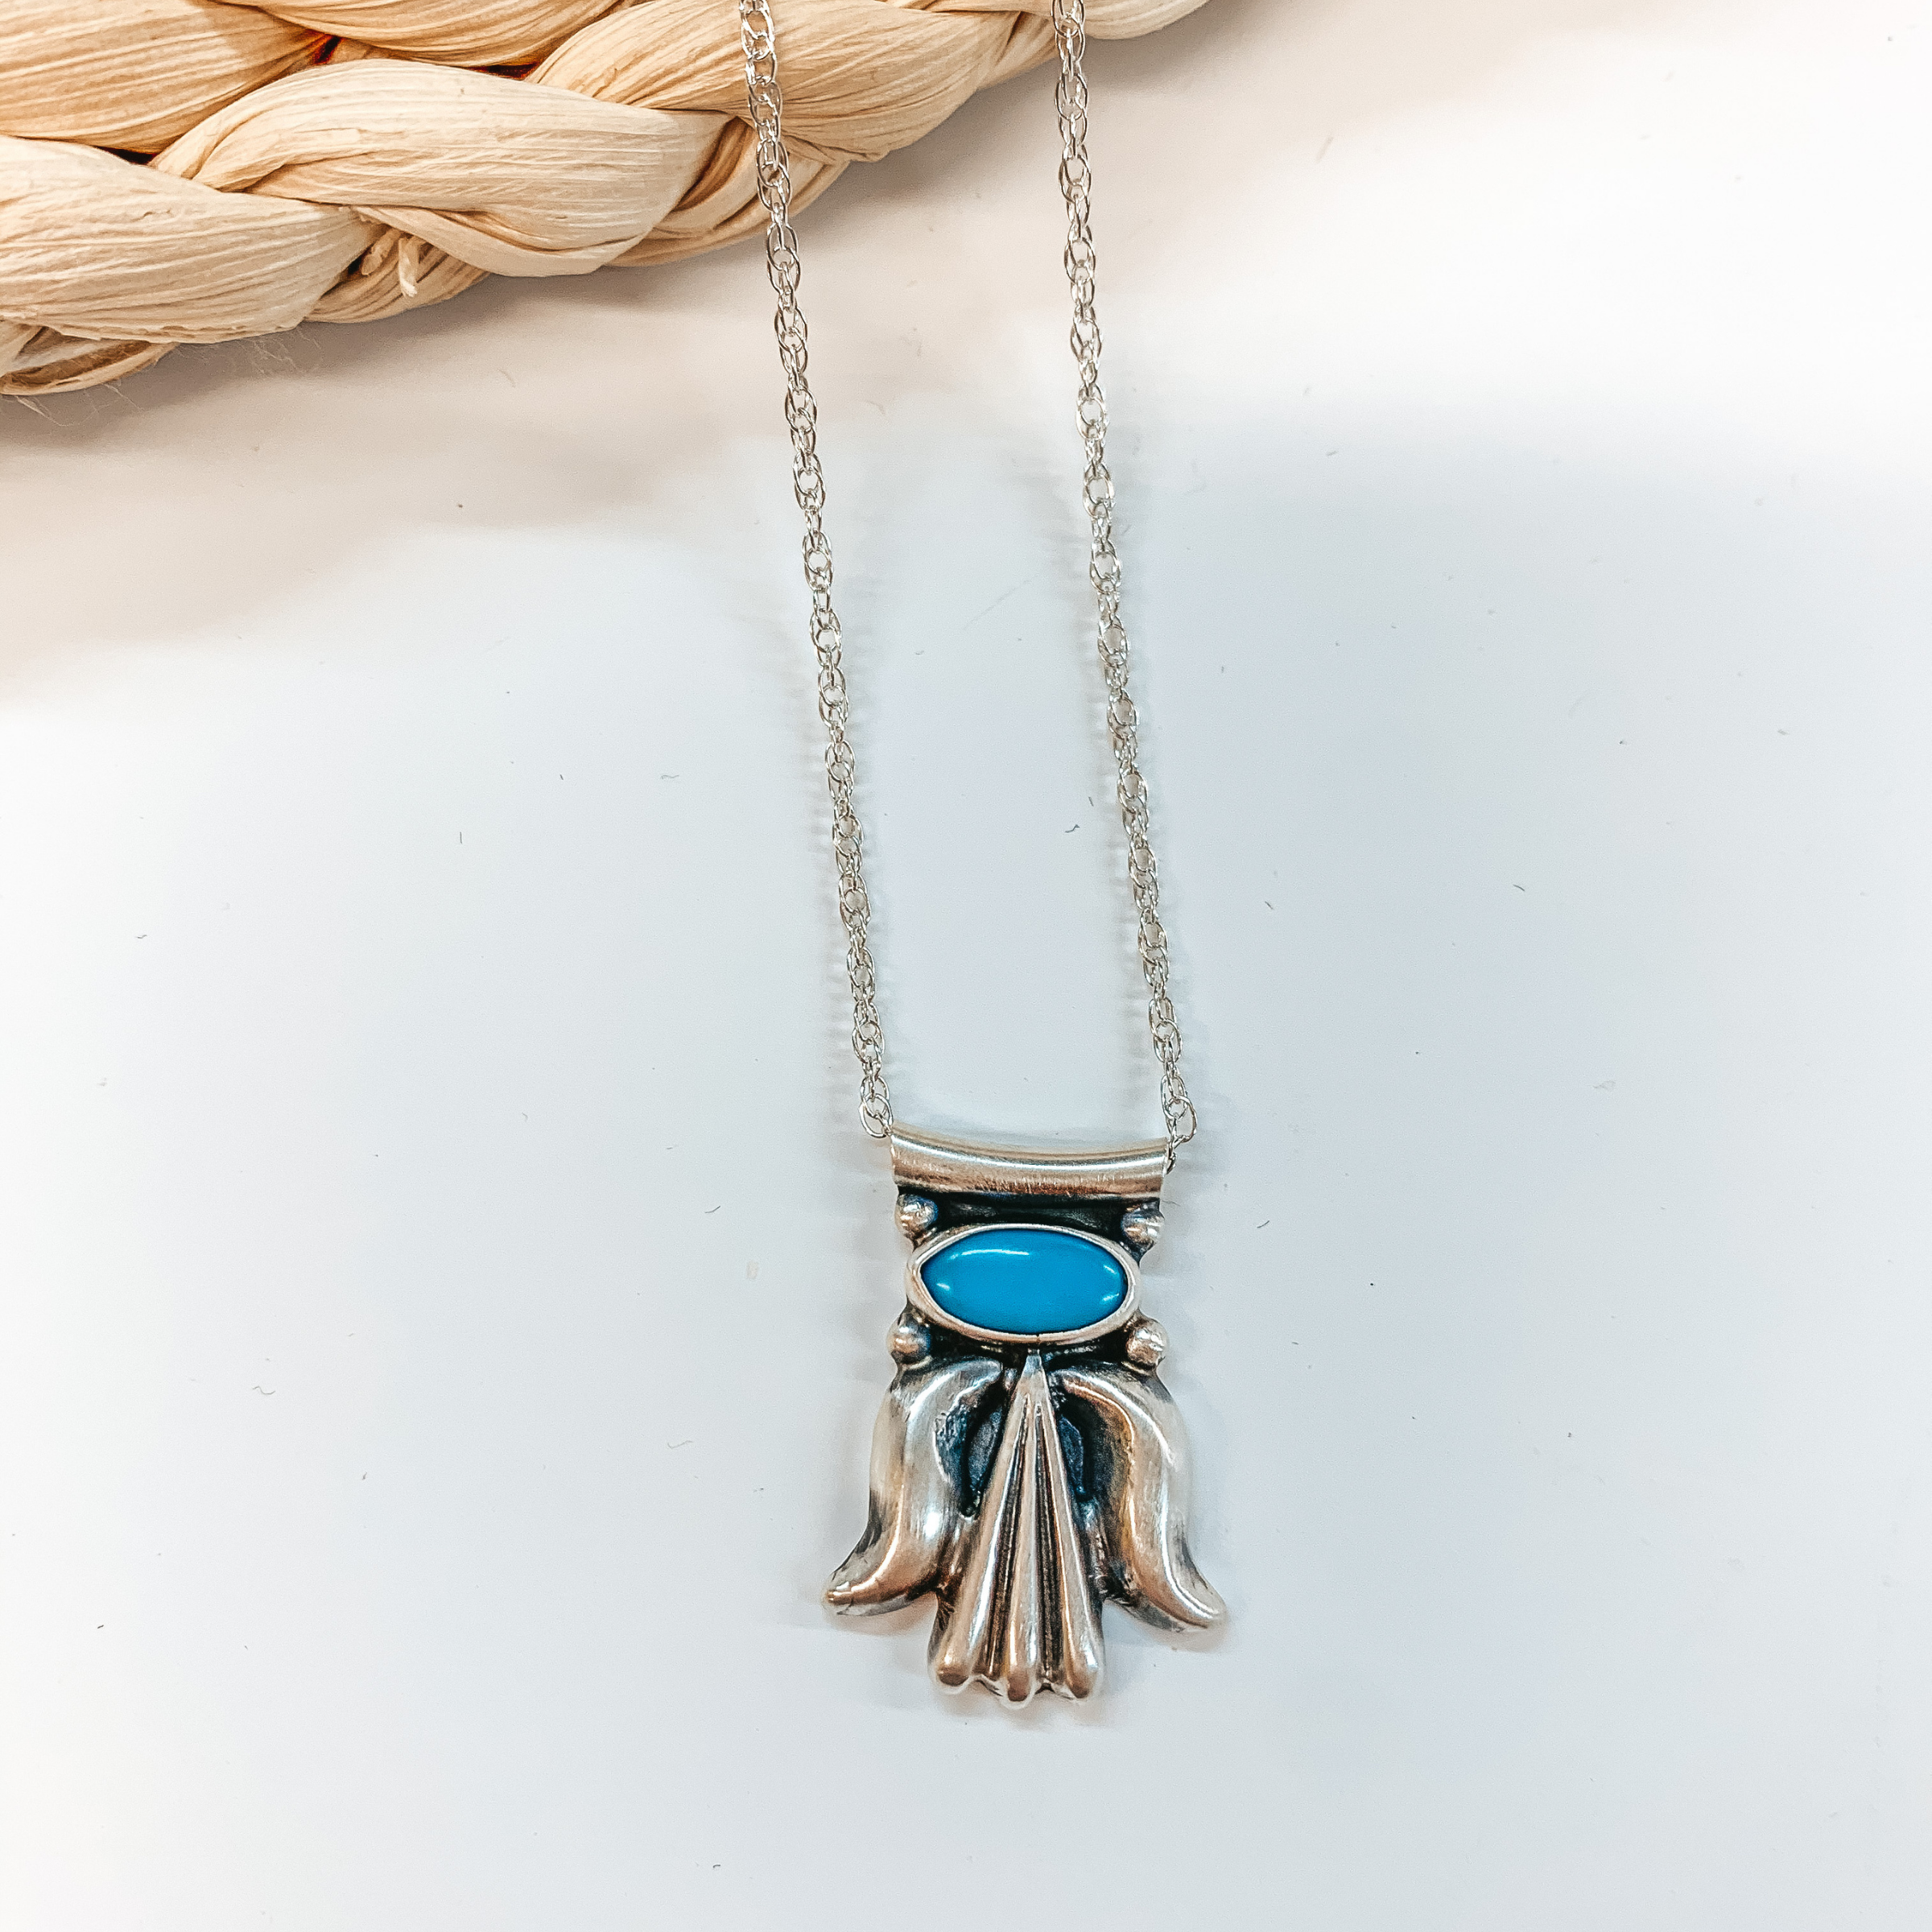 Lee Shorty | Navajo Handmade Genuine Sterling Silver and Kingman Turquoise Pendant Chain Necklace - Giddy Up Glamour Boutique